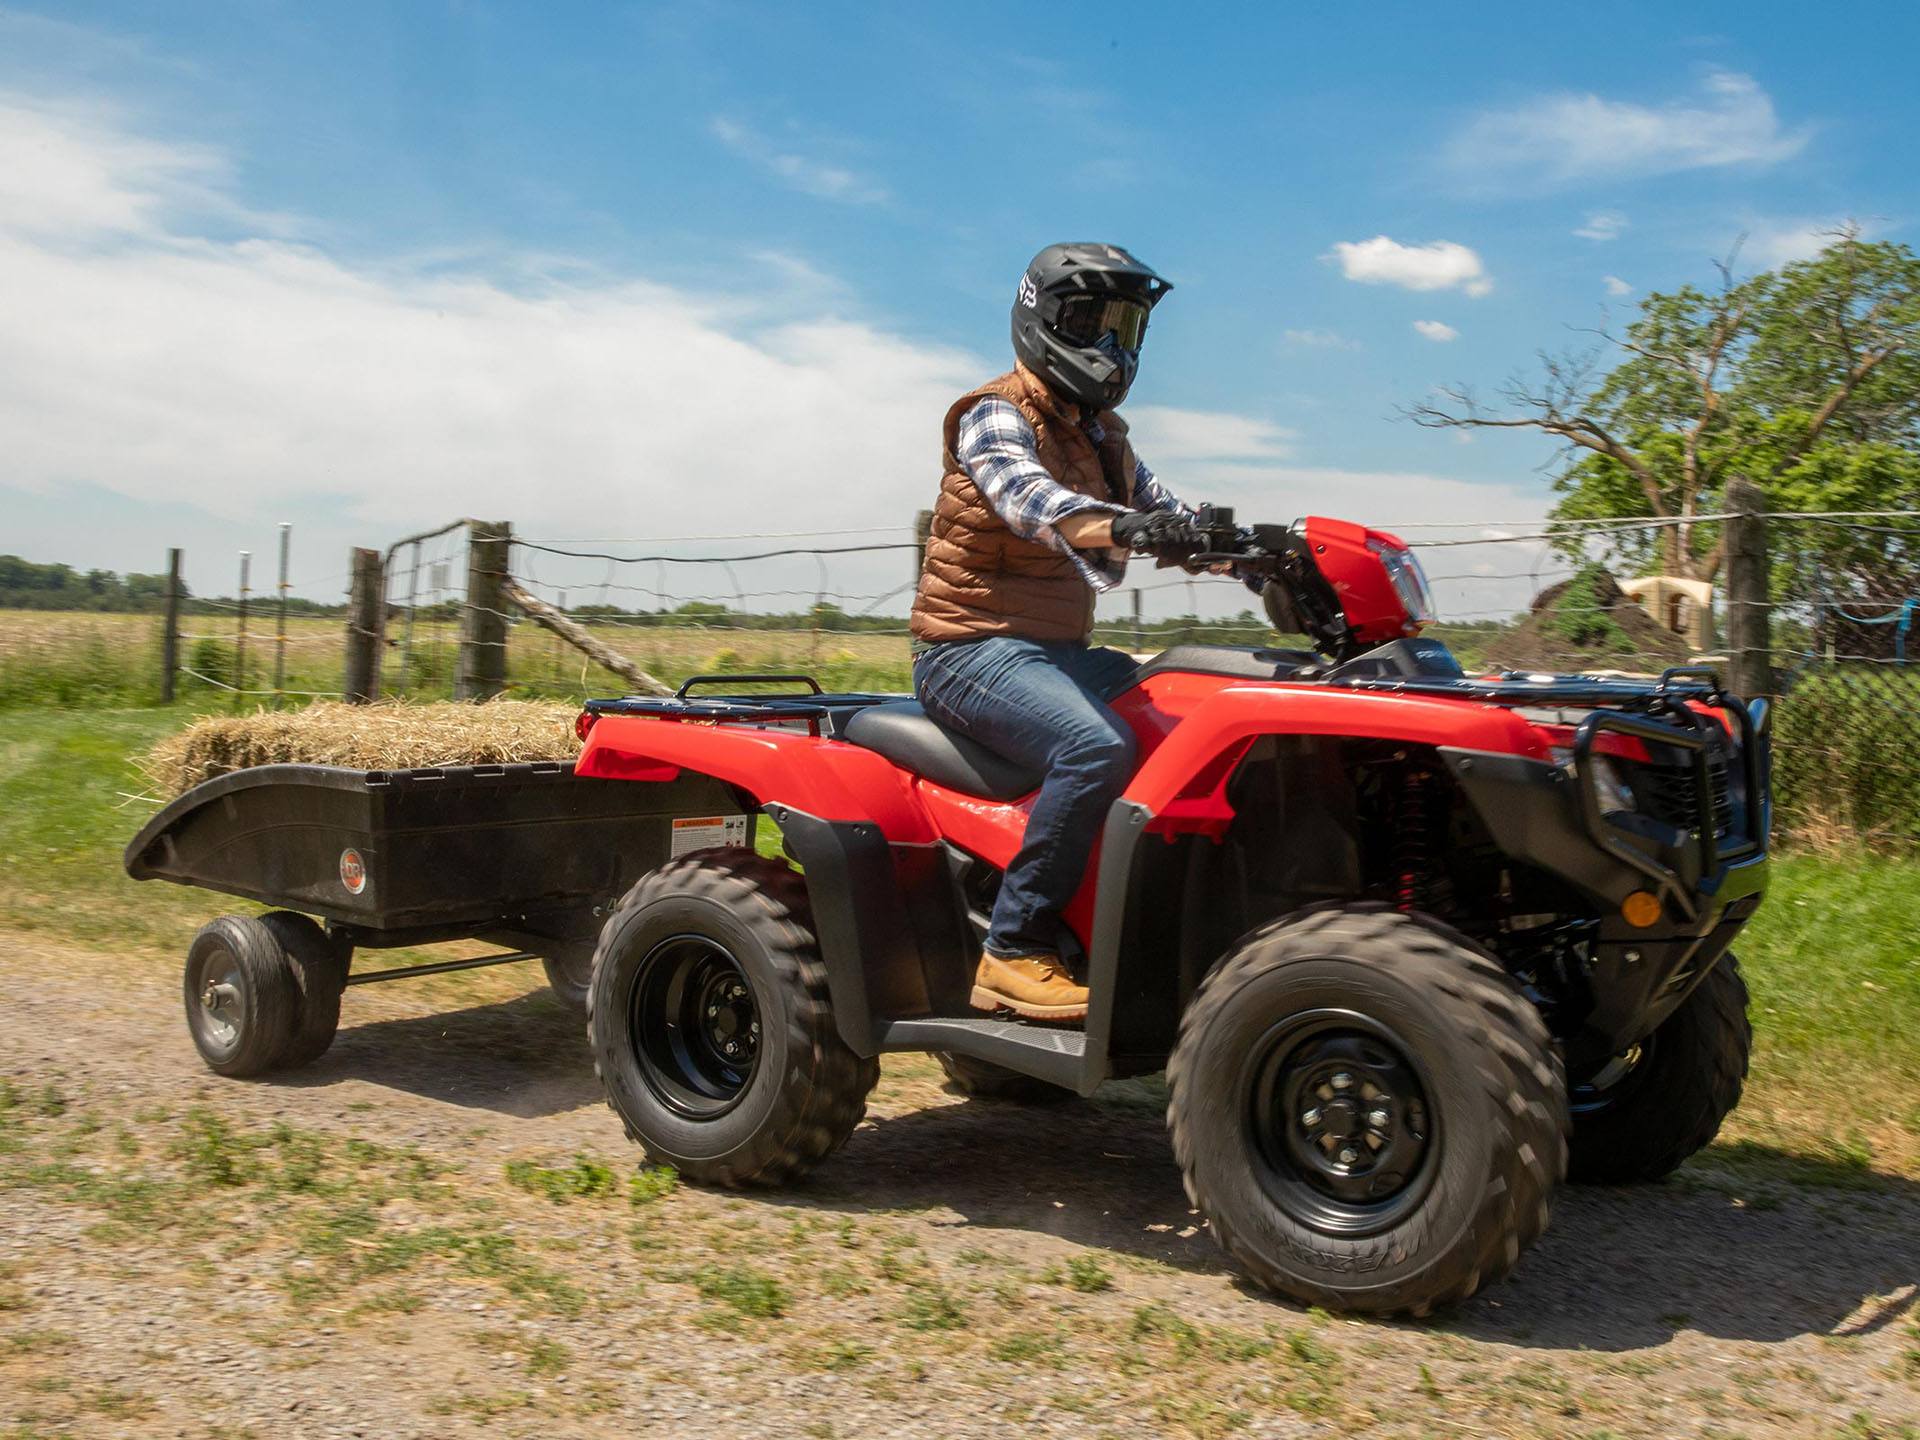 2023 Honda FourTrax Foreman 4x4 in Greeneville, Tennessee